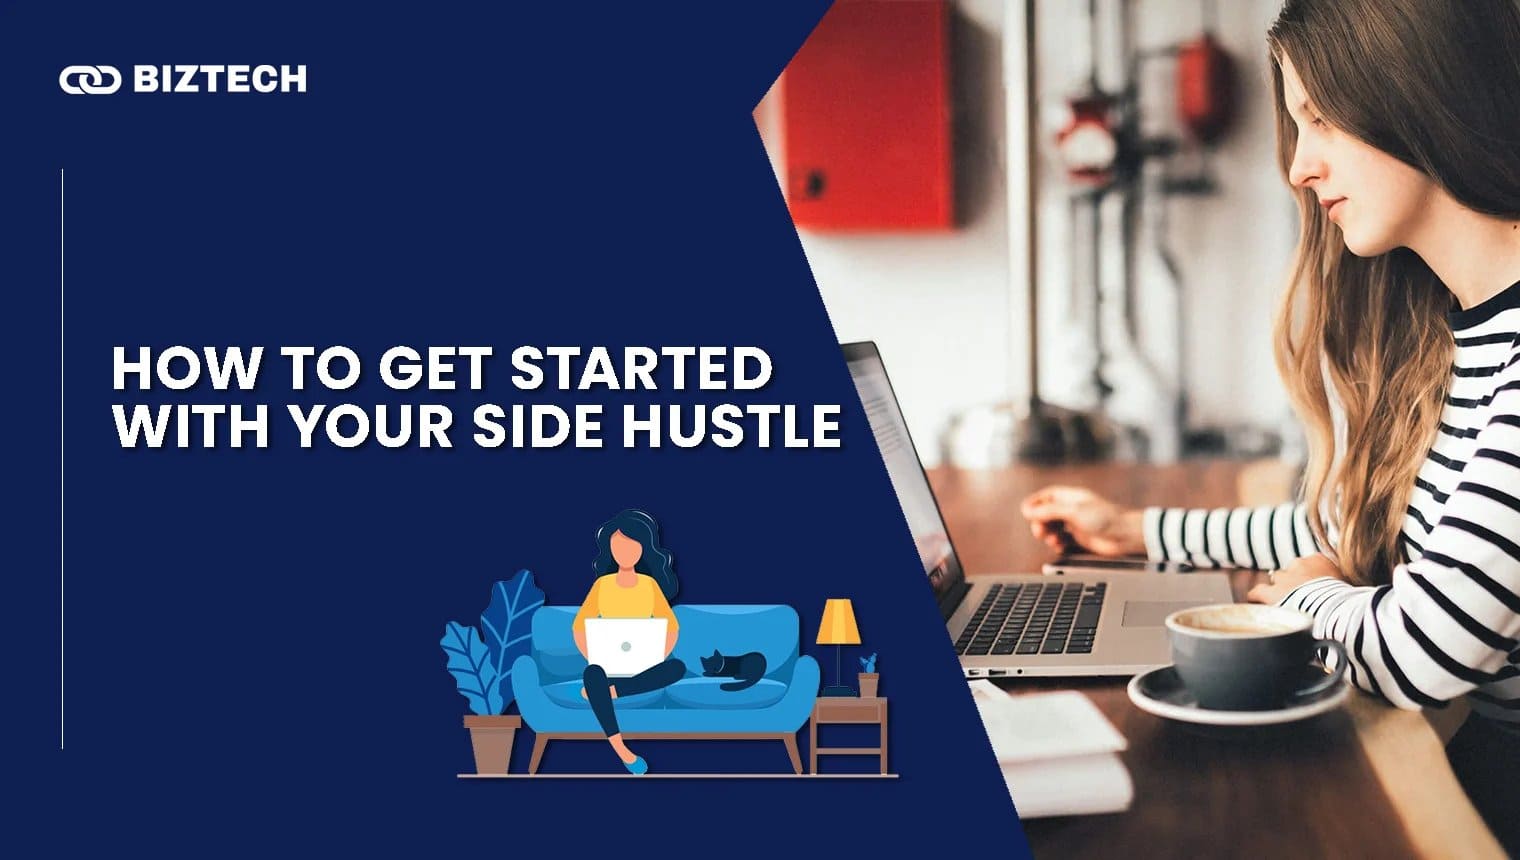 How to Get Started with Your Side Hustle